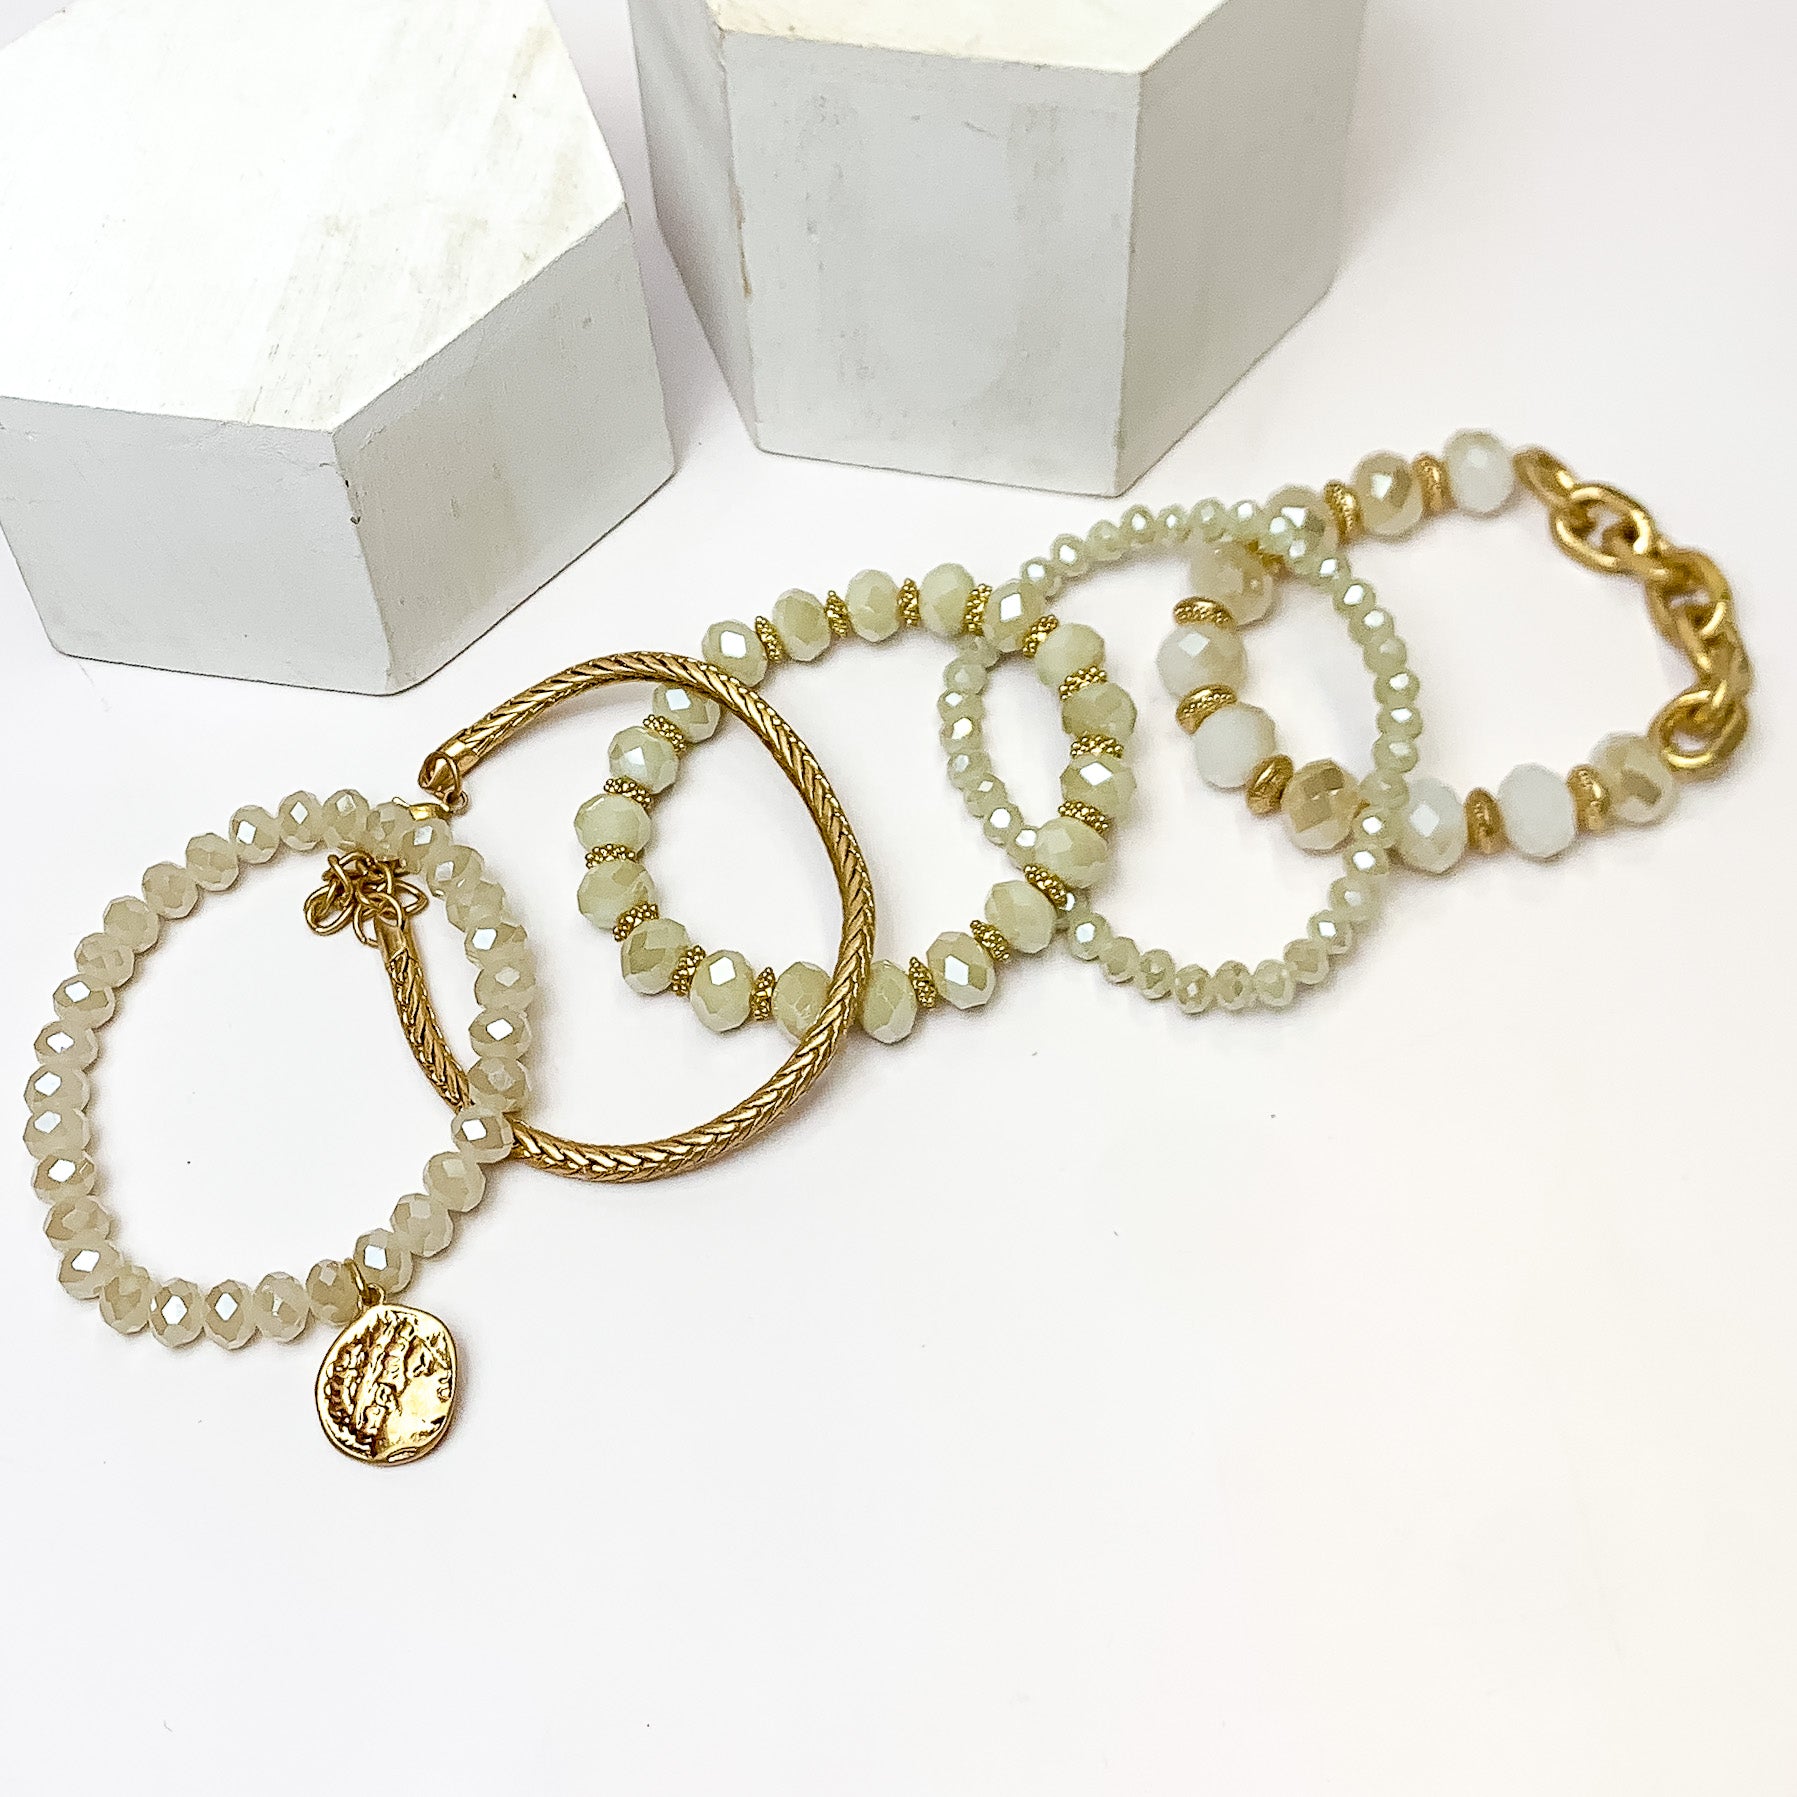 Set of Five | City Dreamer Gold Tone Bracelet Set. Pictured on a white background with two white podiums behind the bracelets.